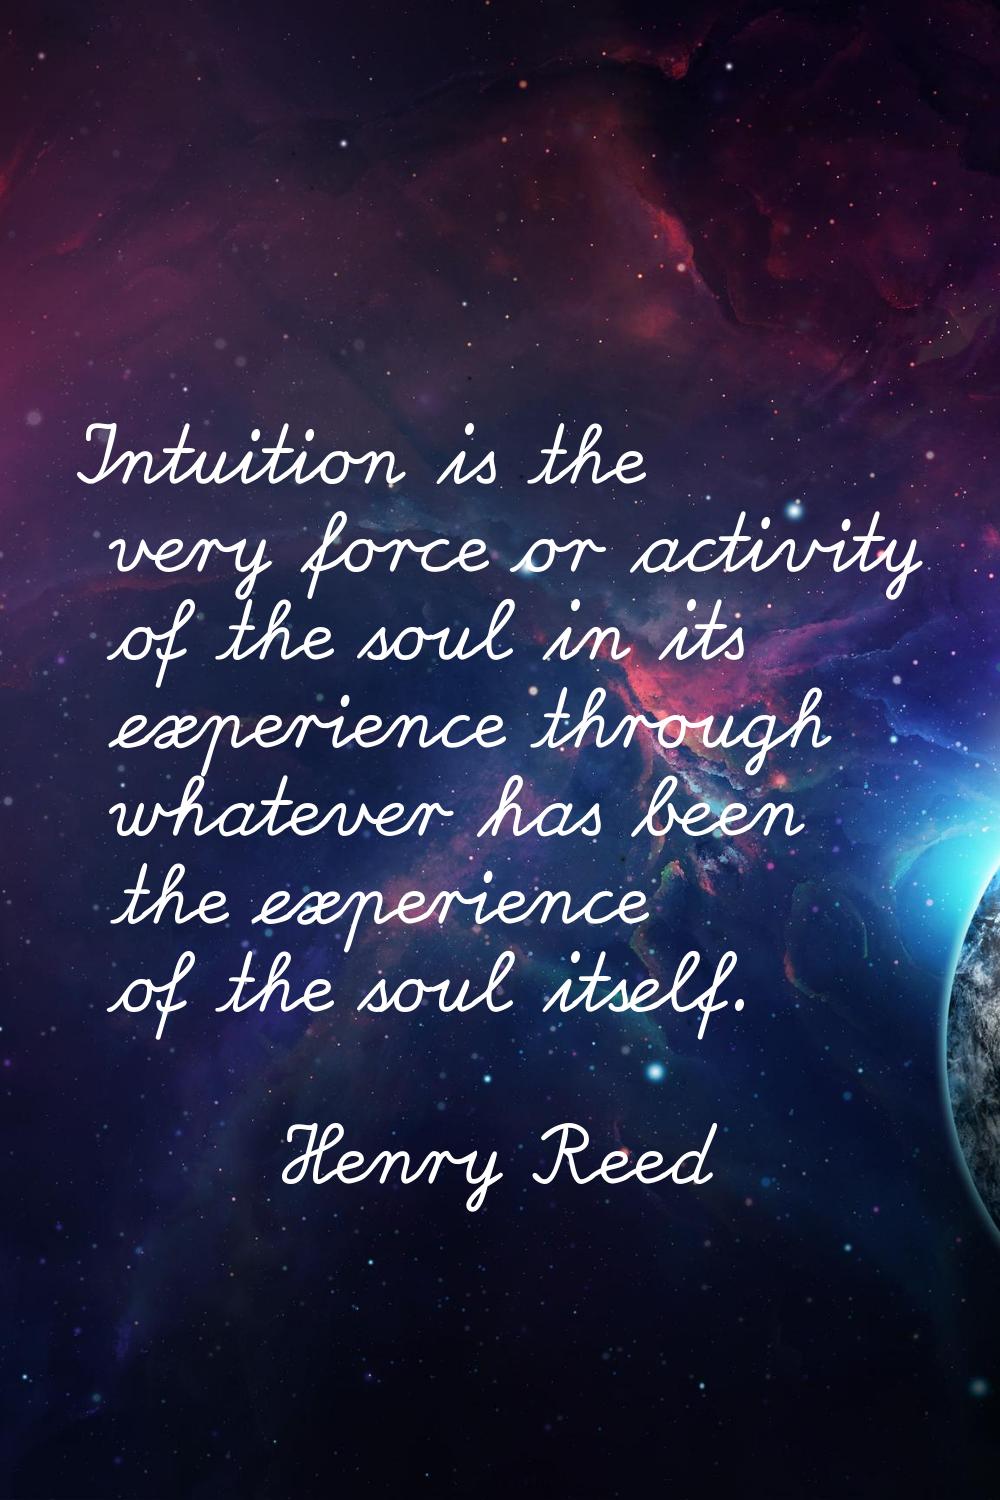 Intuition is the very force or activity of the soul in its experience through whatever has been the